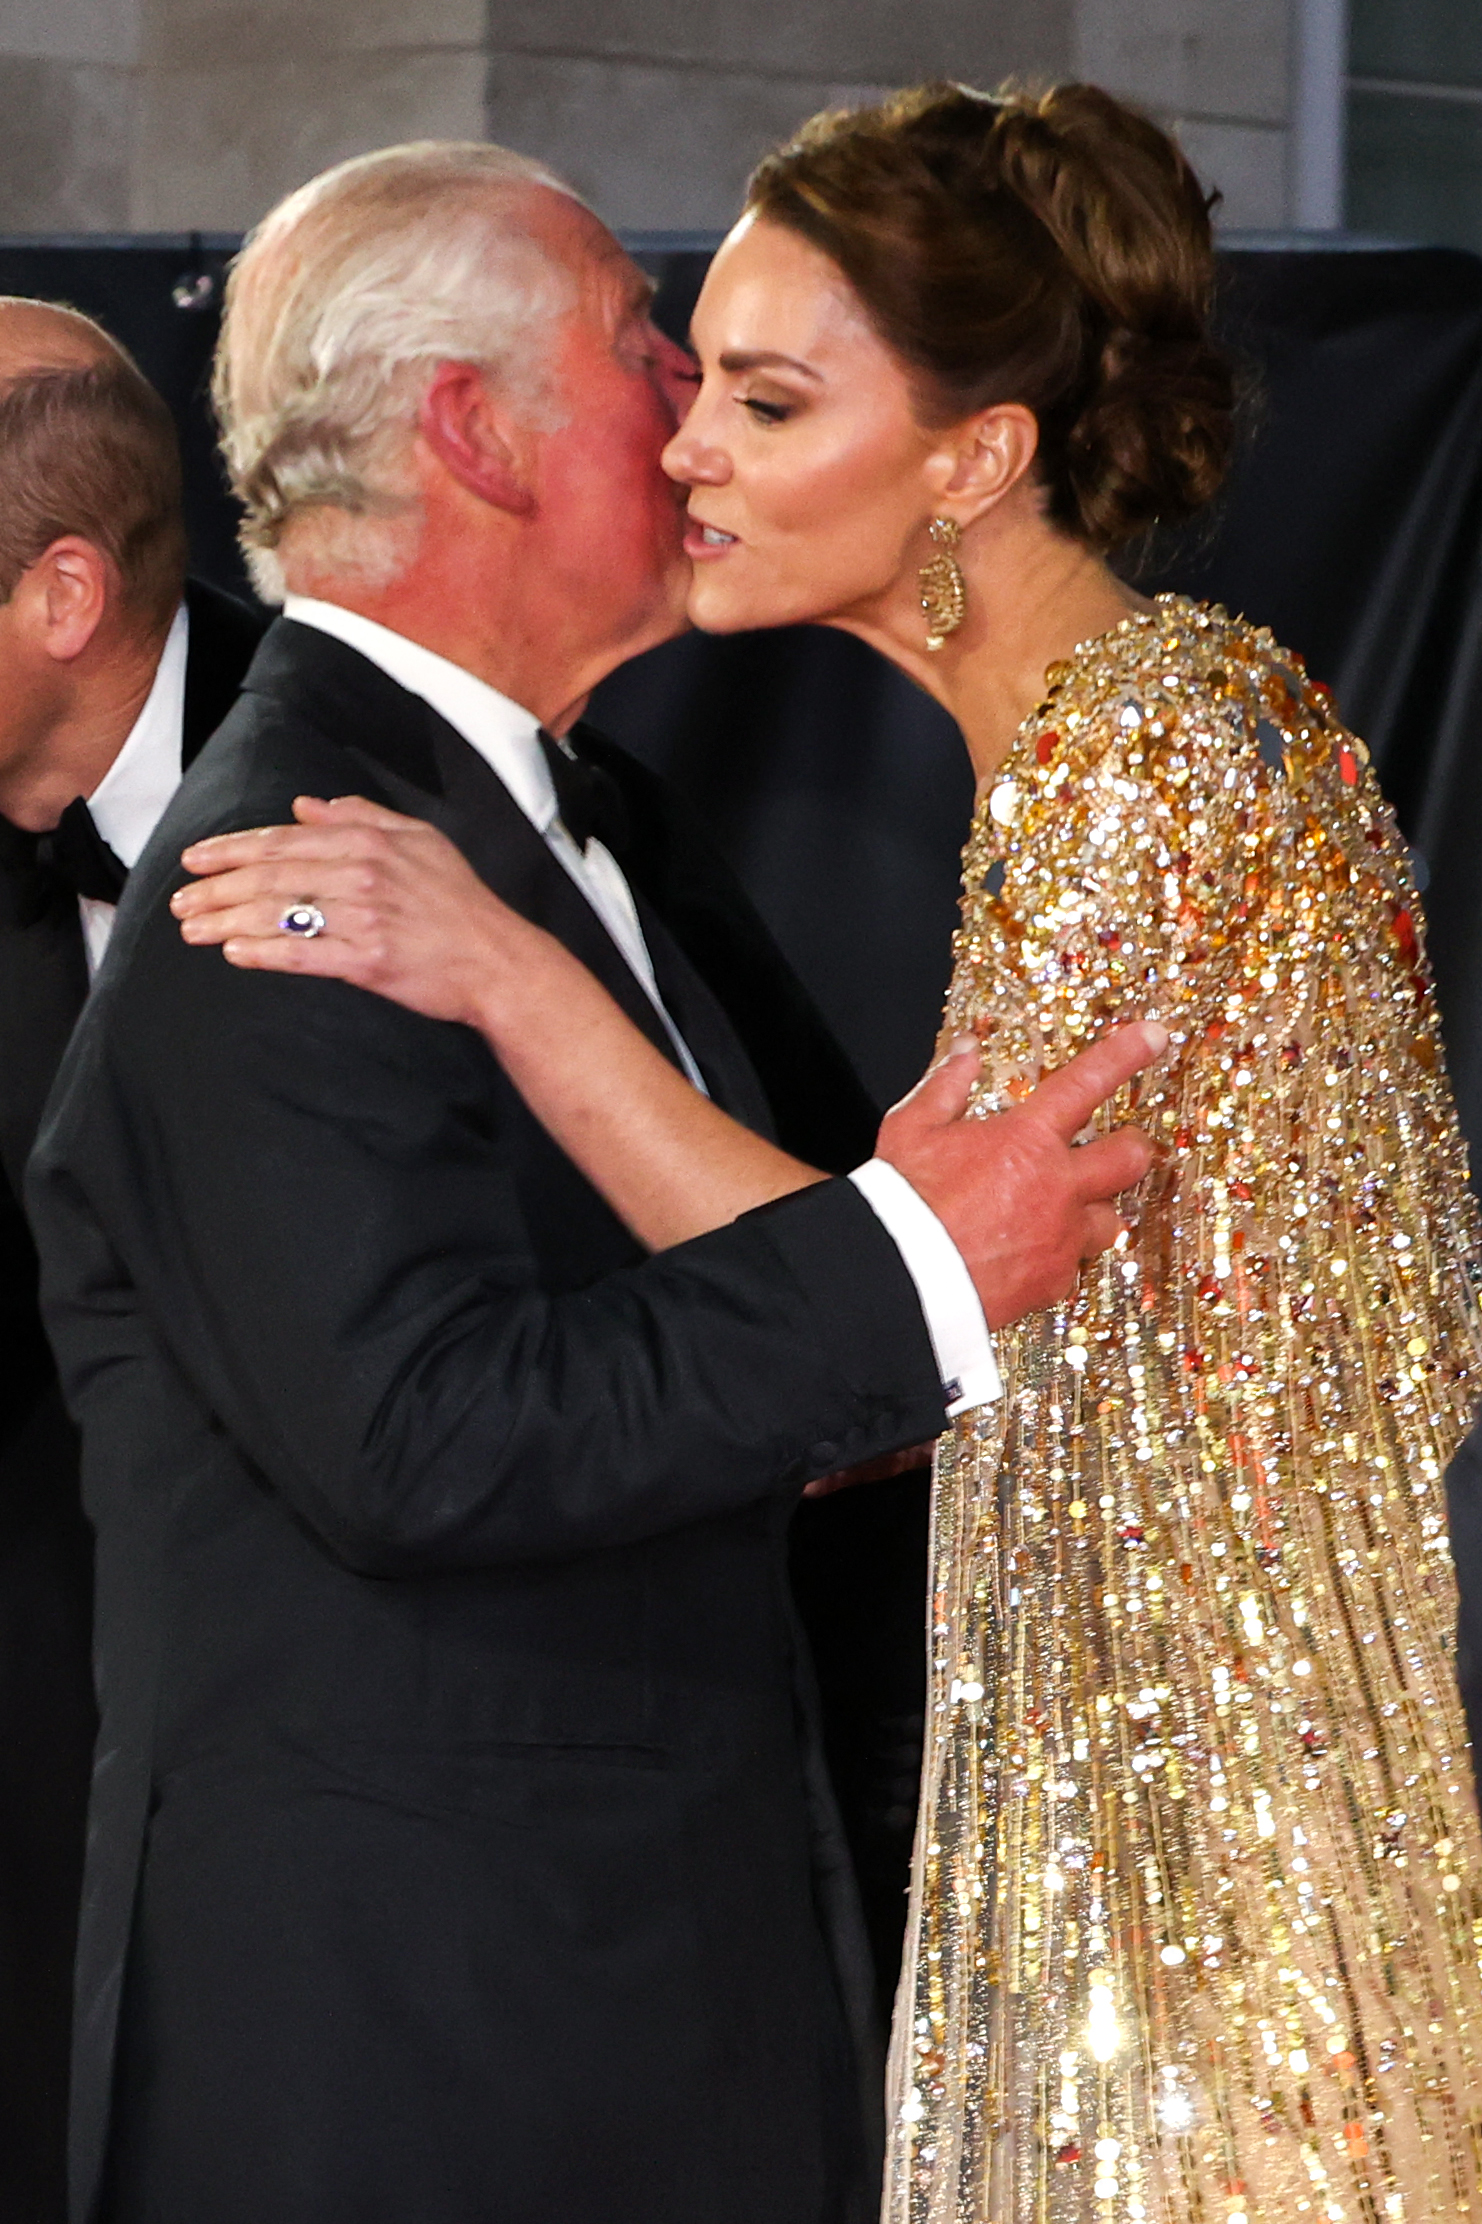 King Charles III and the Princess of Wales, Kate Middleton, at the premiere of the James Bond 007 film "No Time to Die" in West London on September 28, 2021. | Source: Getty Images